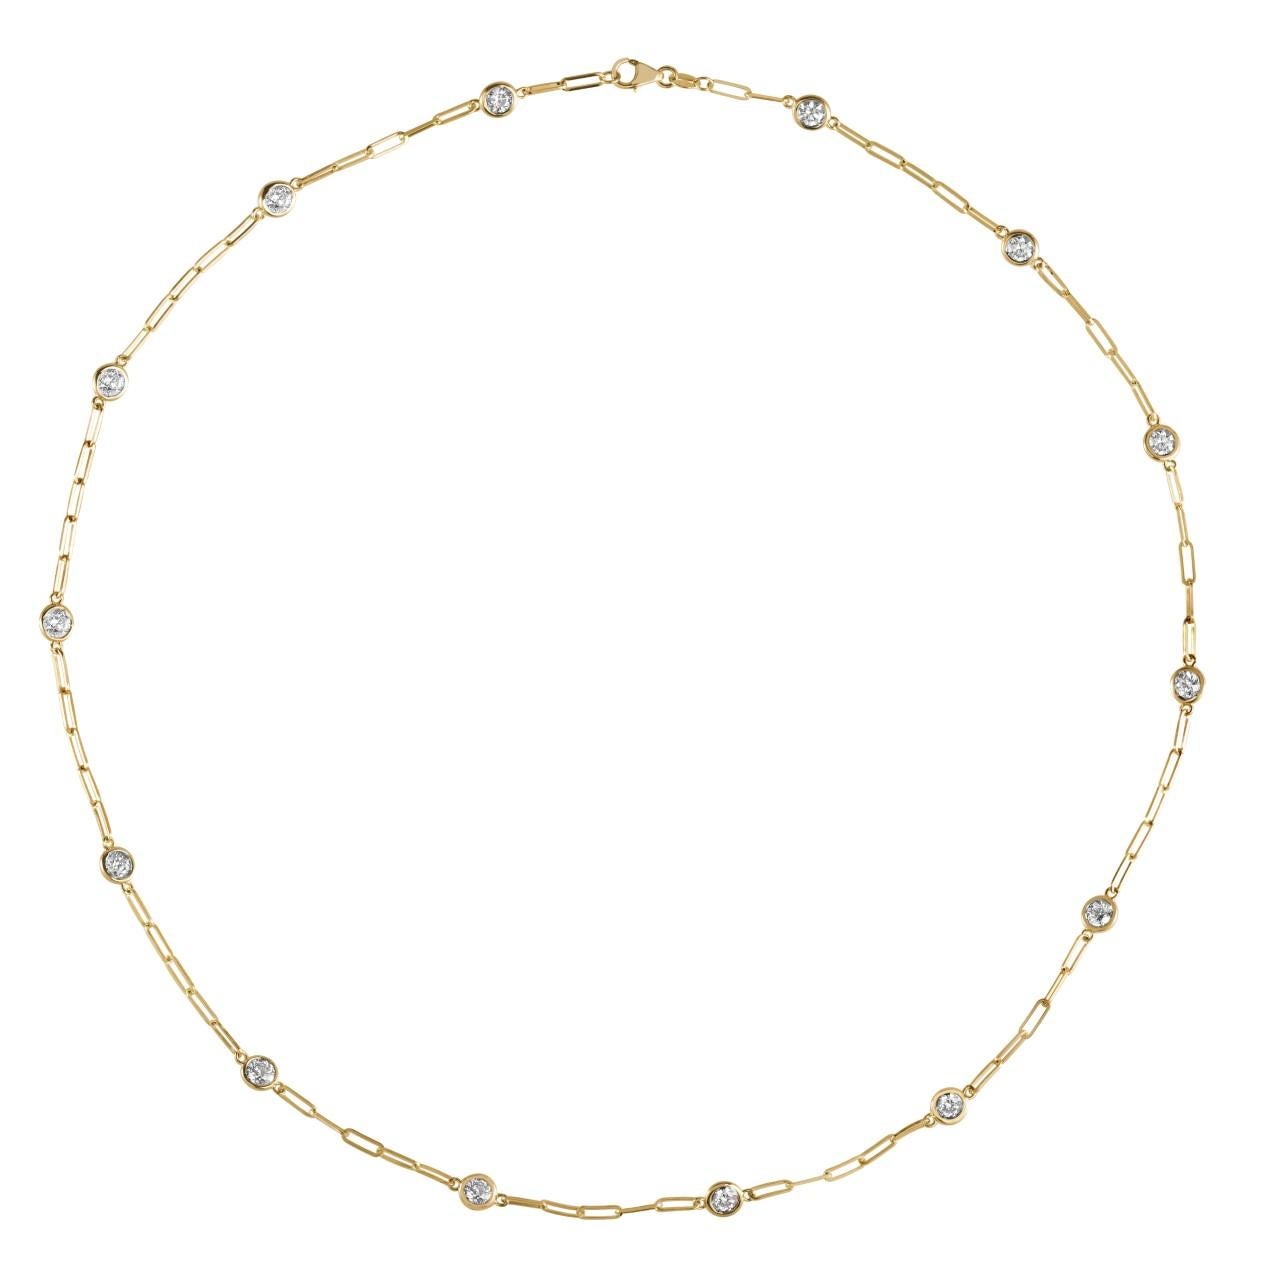 0.75 Carat Diamond by the Yard Paper Clip Necklace G SI 14K Yellow Gold 14 stones 18 inches

100% Natural Diamonds, Not Enhanced in any way
0.75CT
G-H 
SI  
14K Yellow Gold, Bezel style, 2.7 gram
18 inches in length, 1/8